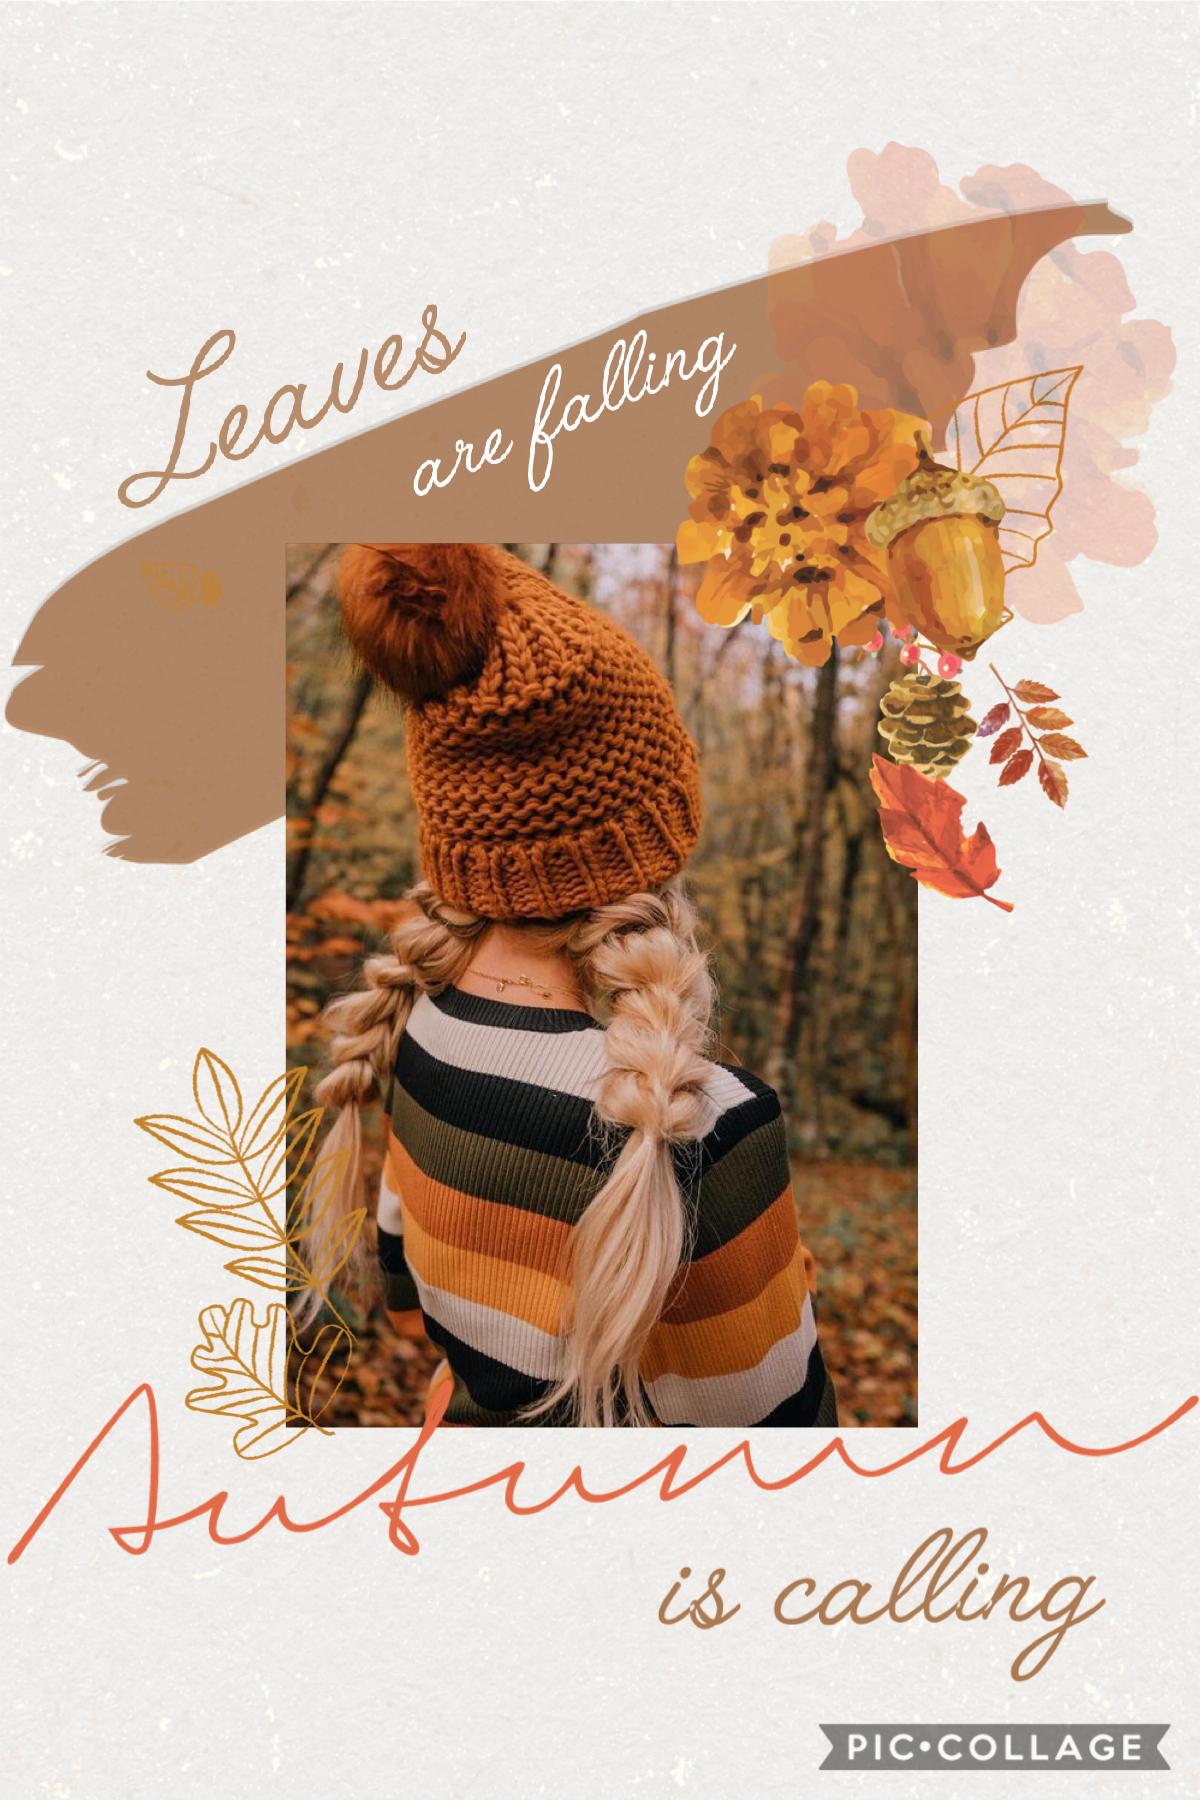 🍁Tap Here🍁
It’s finally September! I can post autumn collages again!!! This was something I did last year but never got around to posting. Please rate 1-10.
QOTD: fav subject?
AOTD: math, come at me 😤